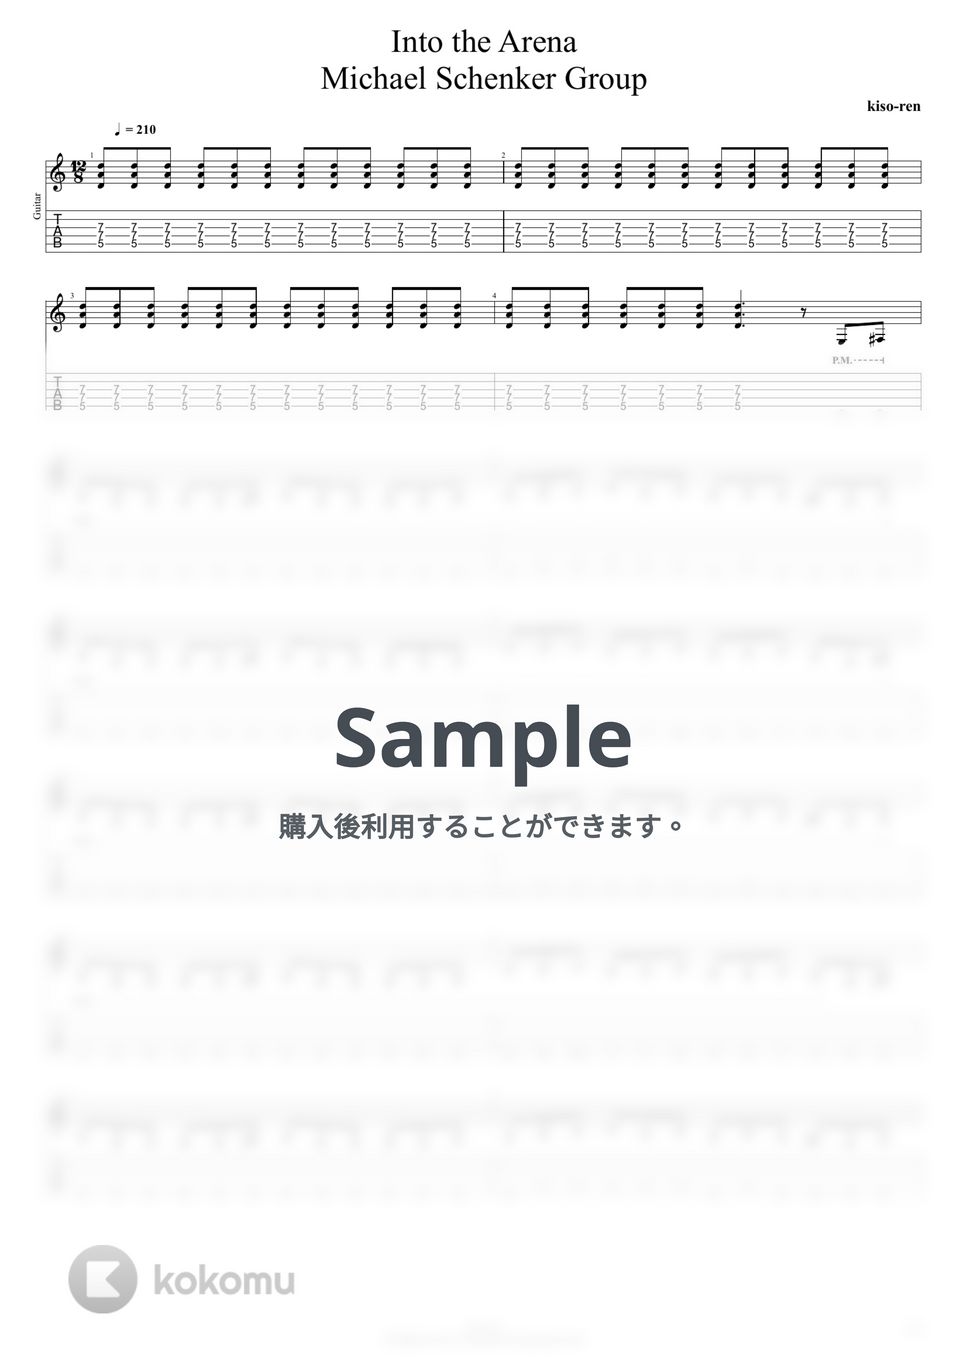 Michael Schenker - Into the Arena - Michael Schenker Group Intro TAB 0:00~0:33 (TAB PDF & Guitar Pro files.（gpX）) by Technical Guitar